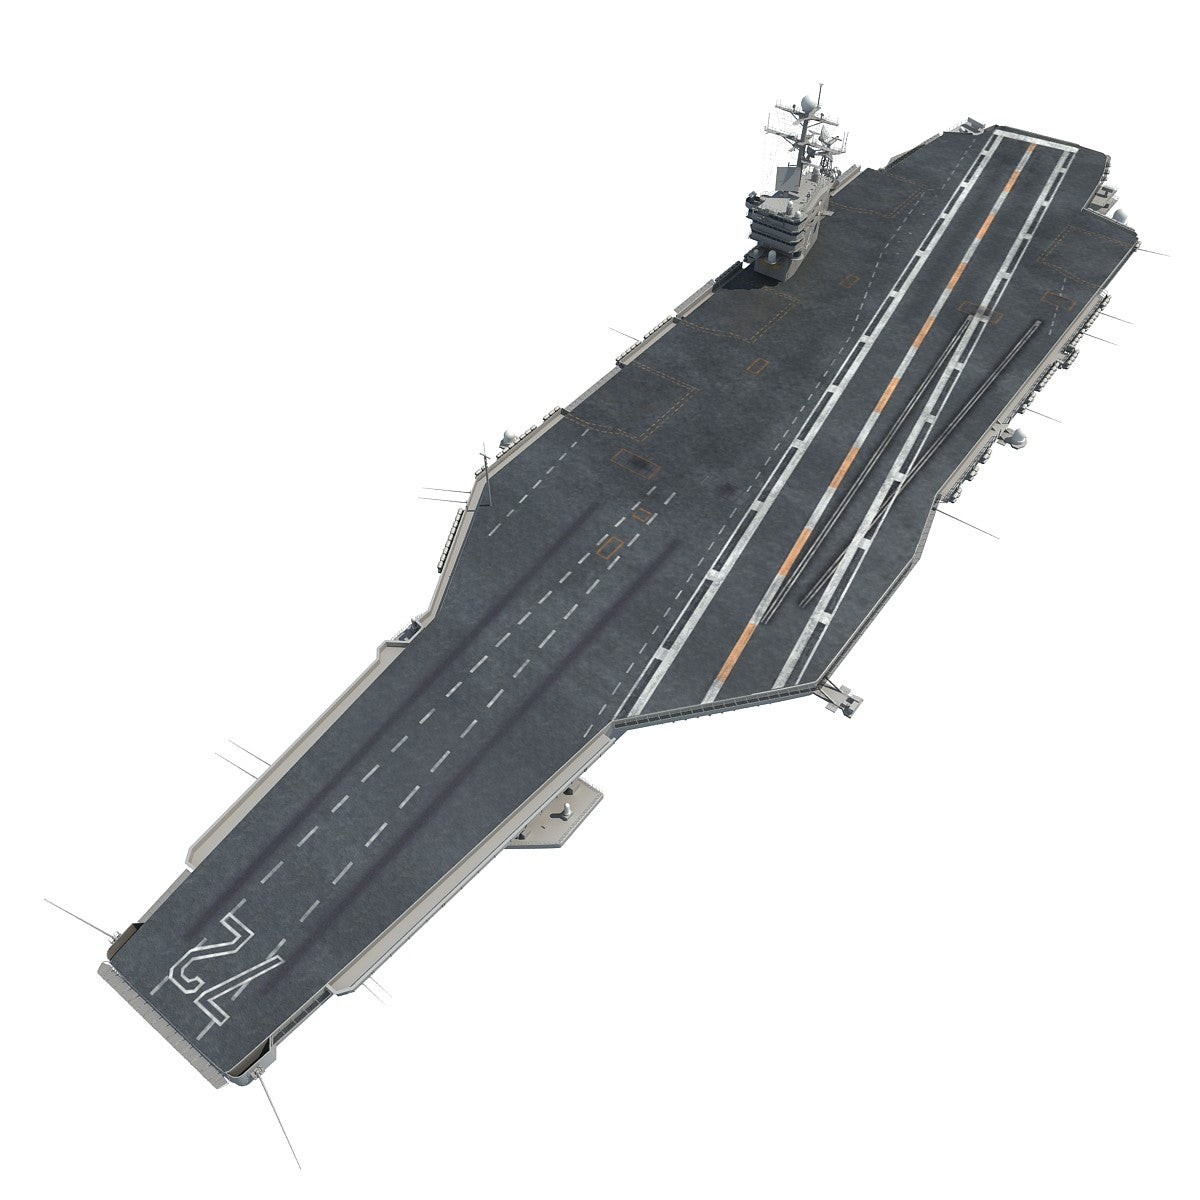 Aircraft Carrier Abraham Lincoln 3D Model